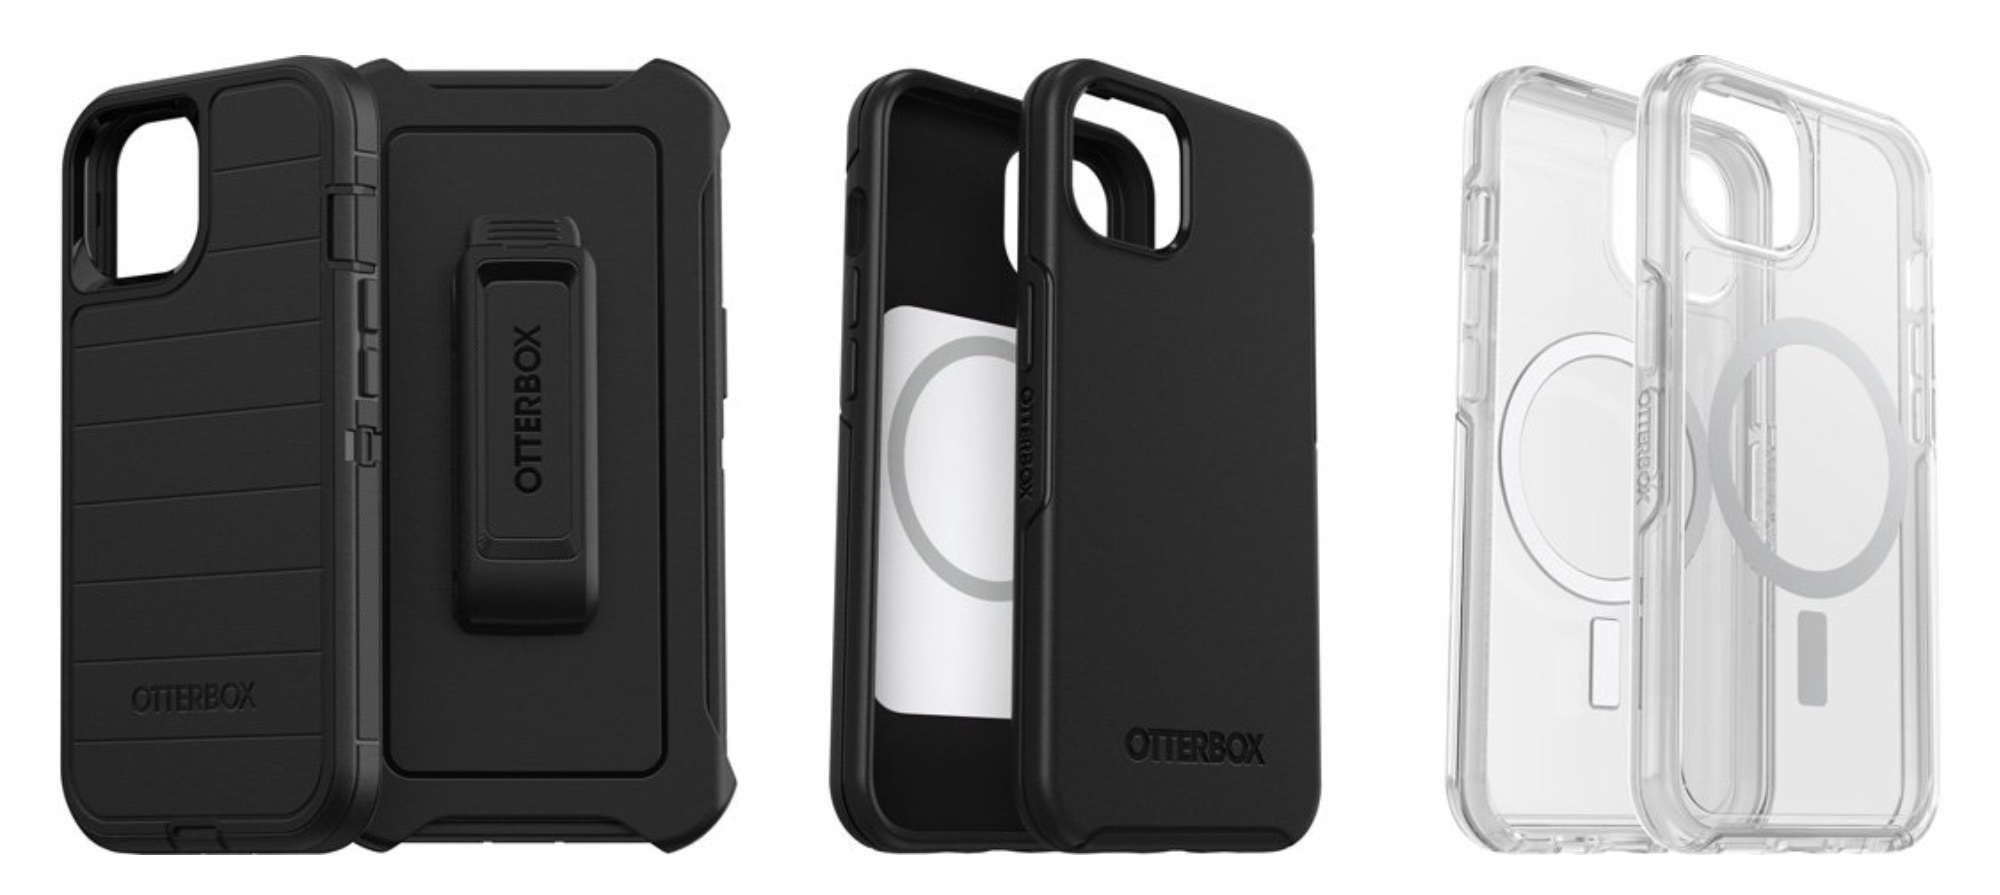 OtterBox iPhone 13 case collection goes live 9to5Toys